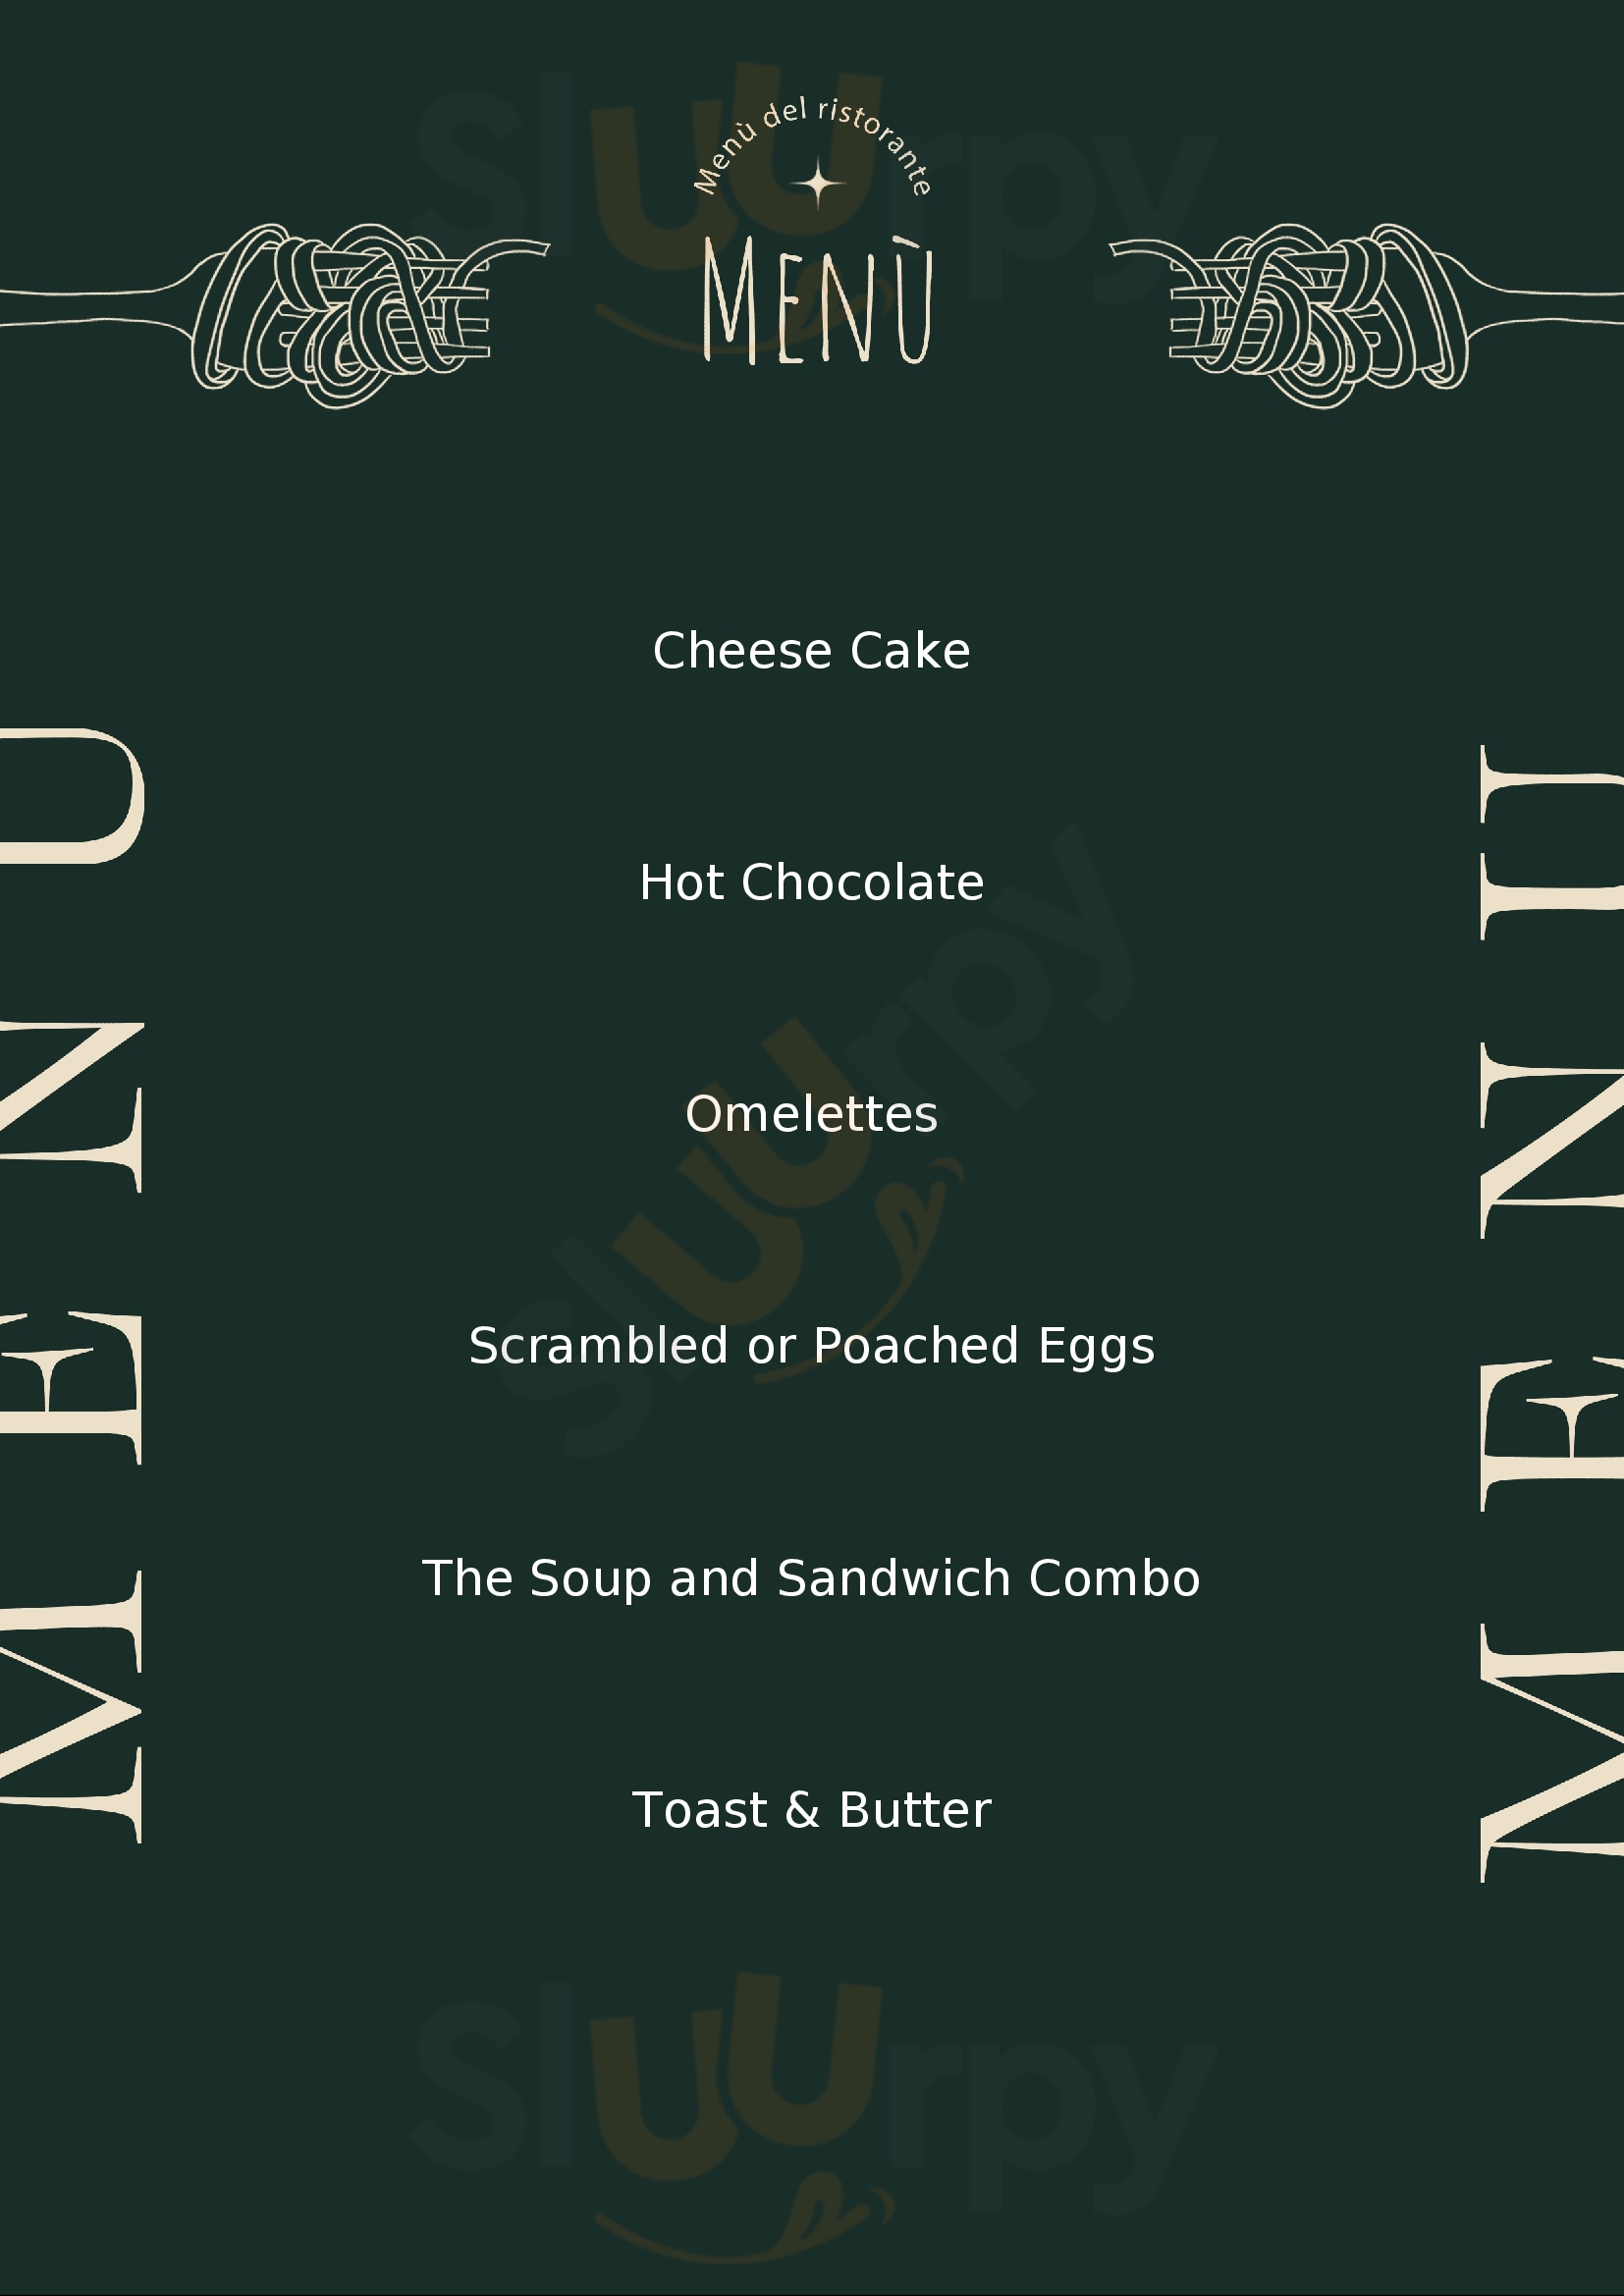 The Olive Cafe Waterford Menu - 1